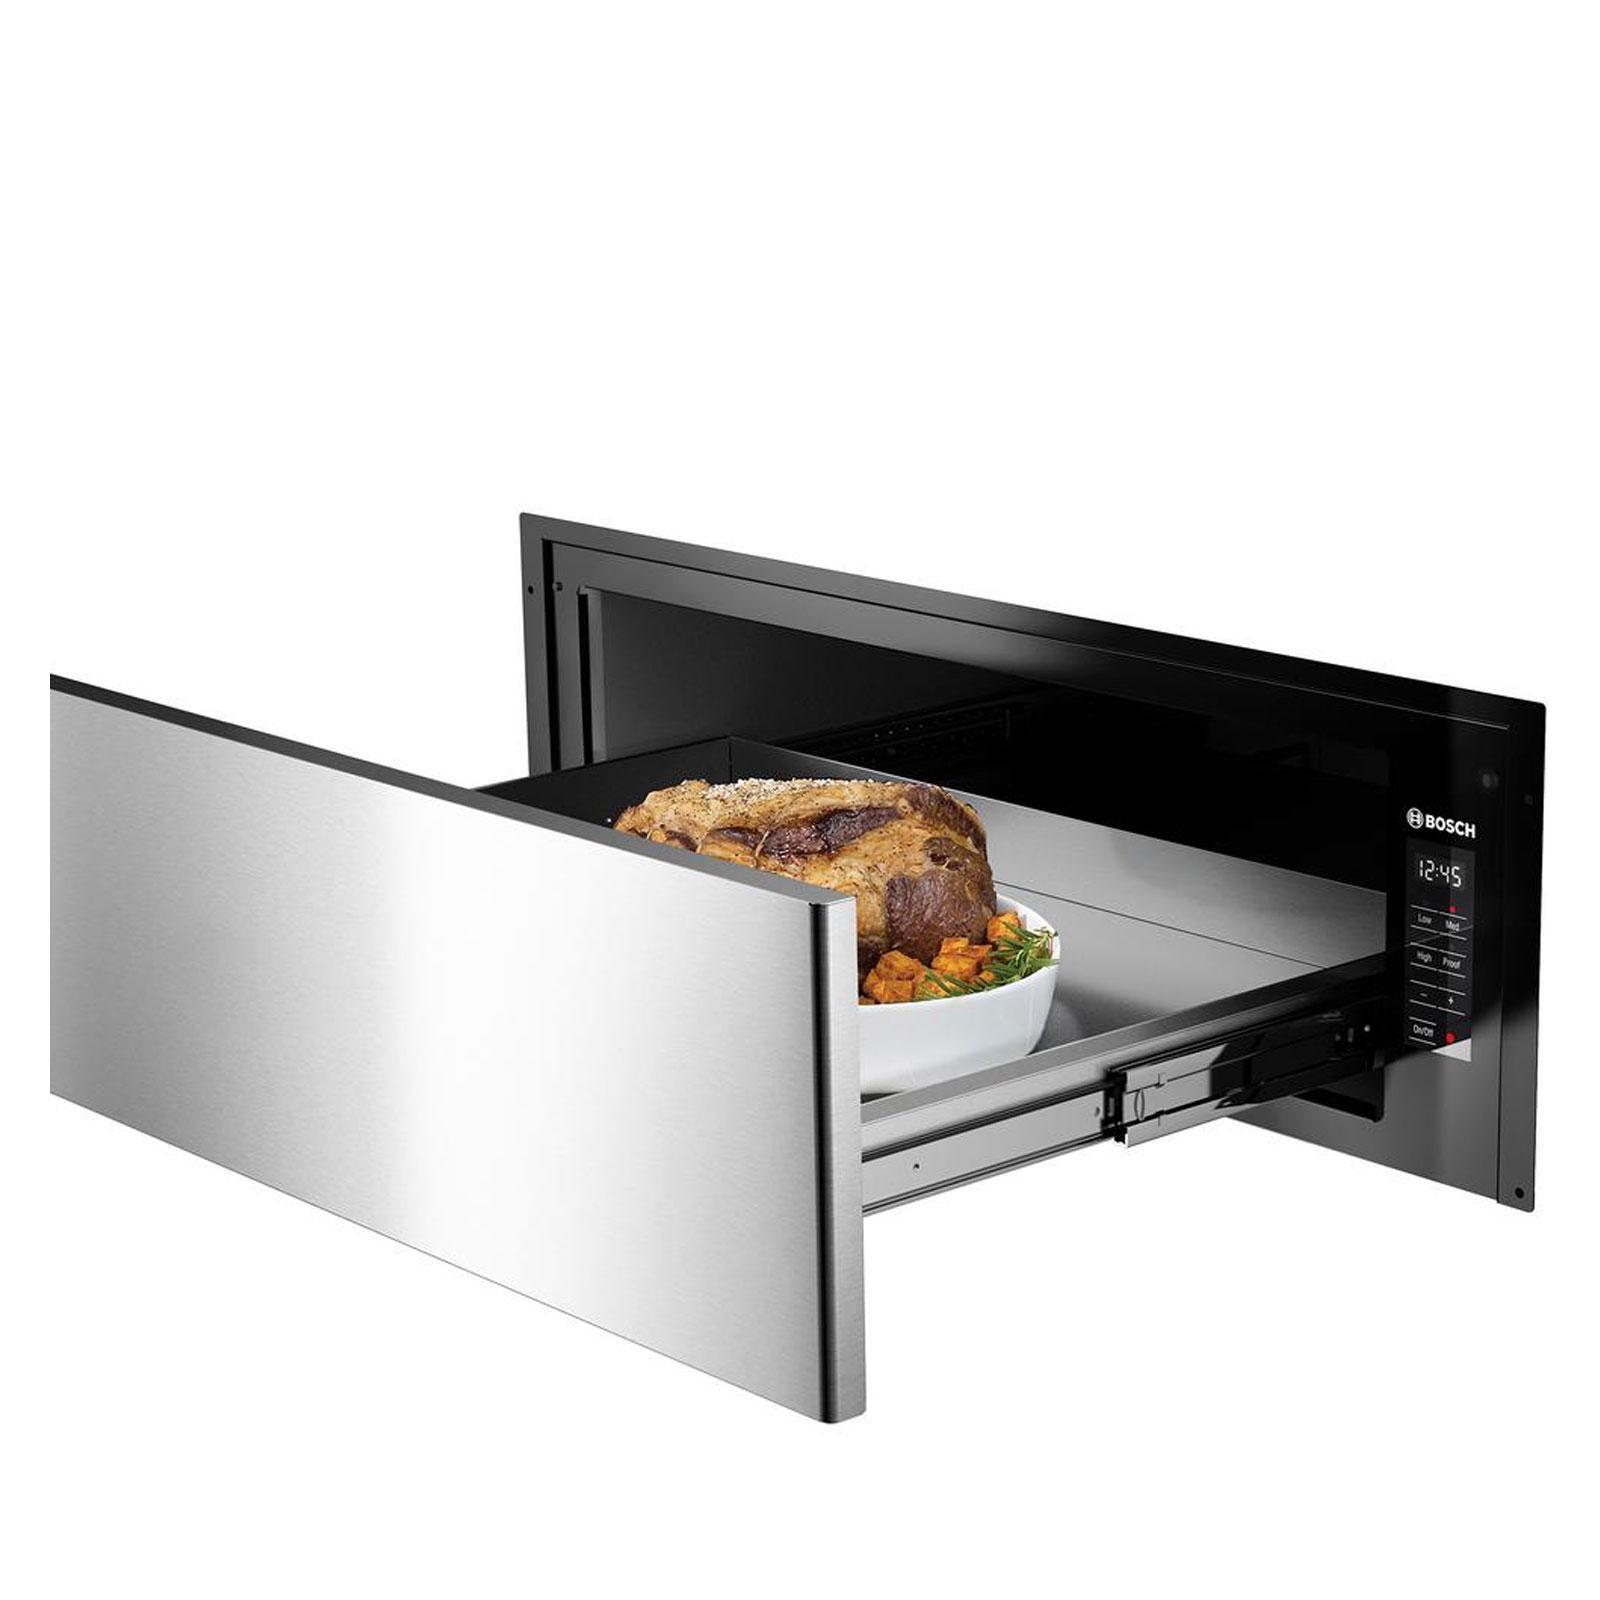 Bosch 2.2 cu. ft Warming Drawer Wall Oven in Stainless